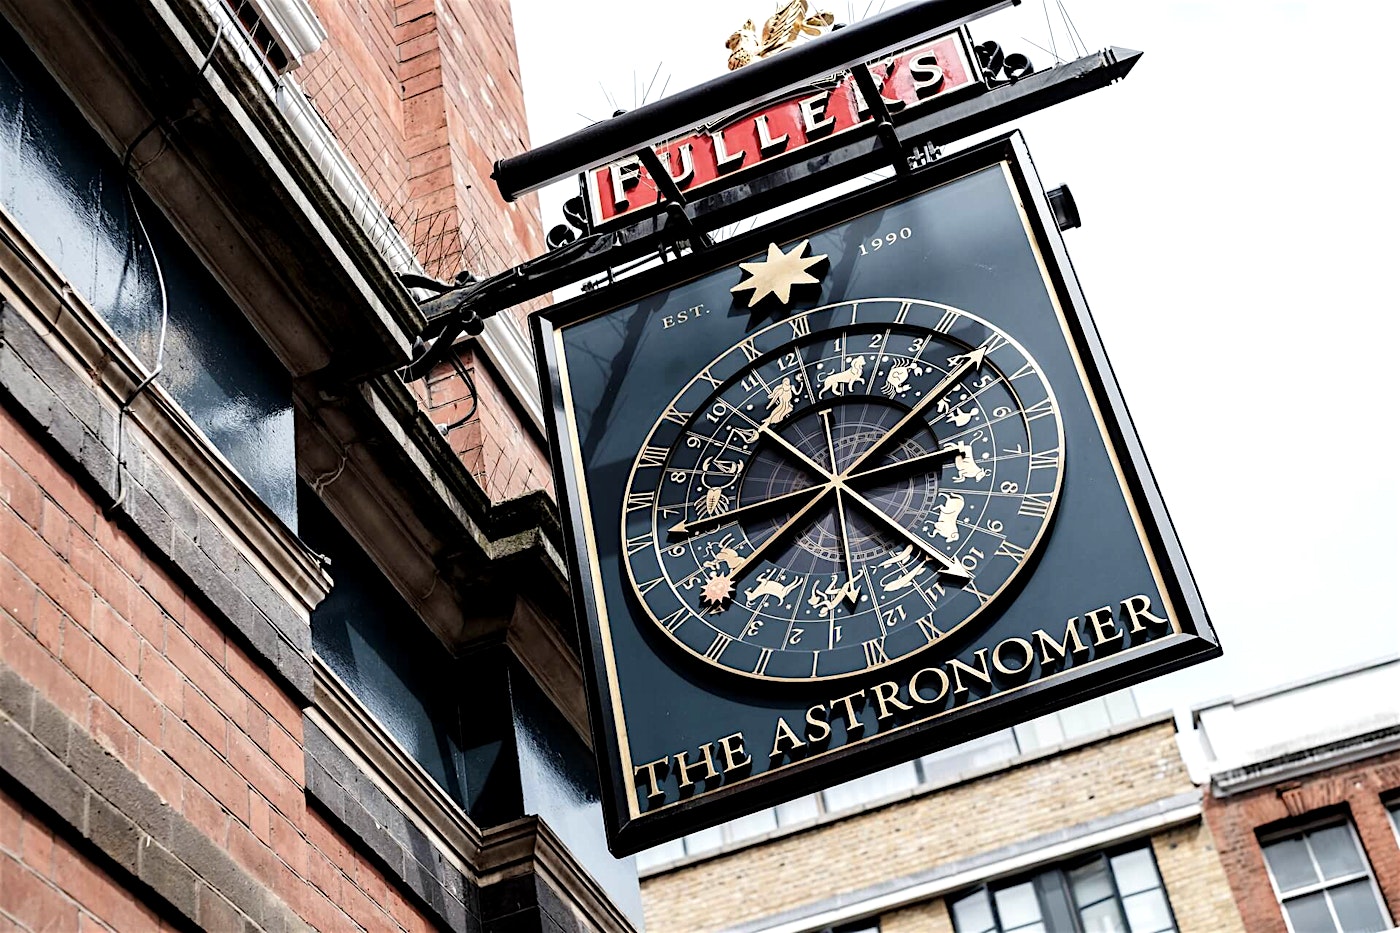 Pub sign outside the Astronomer, near Liverpool Street, London